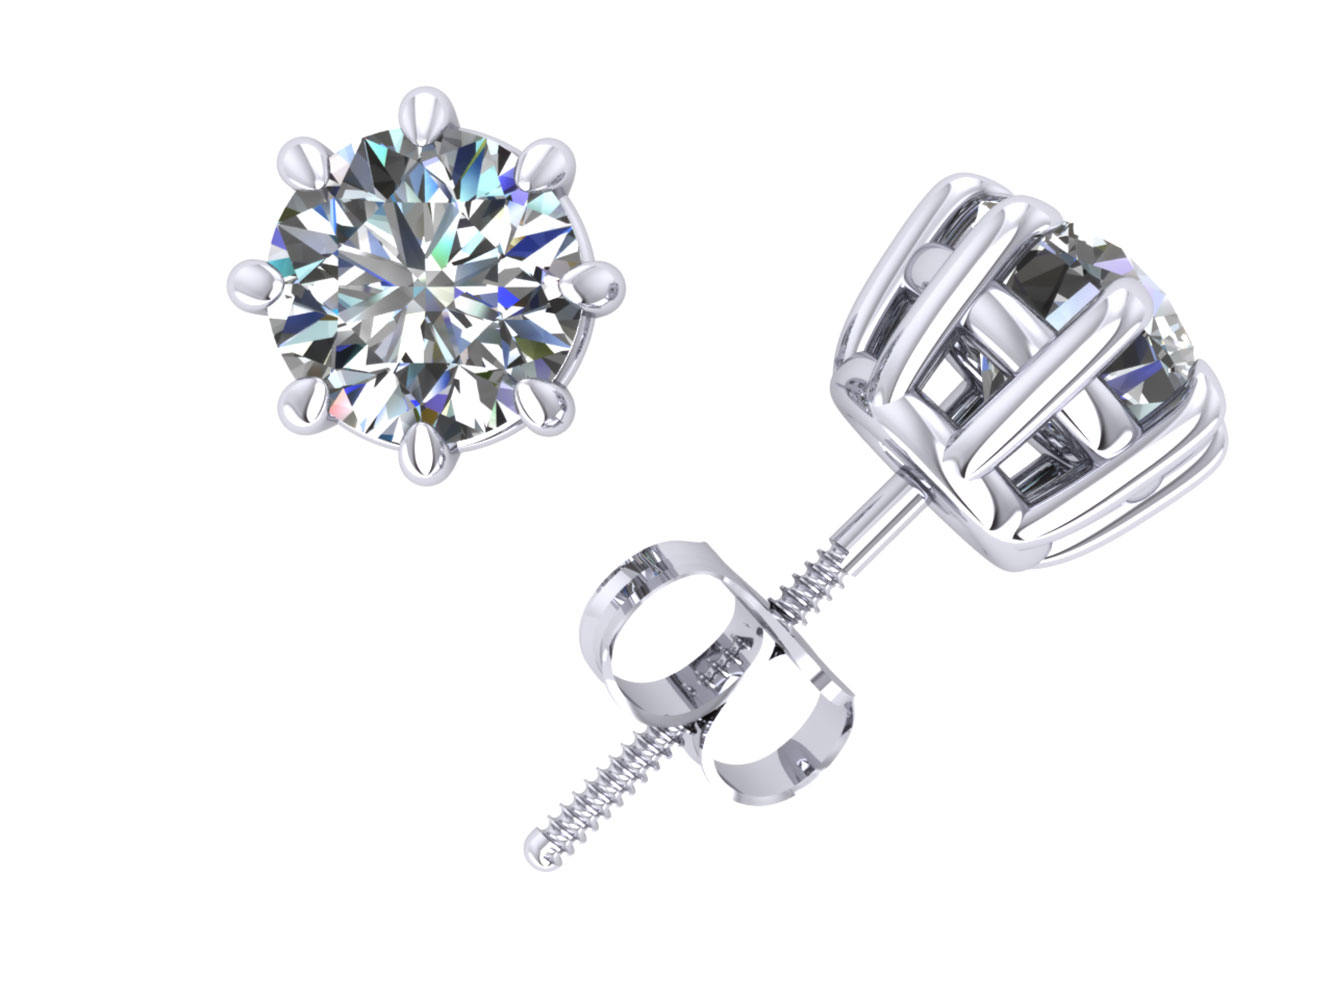 Jewel We Sell 1.50Ct Round Cut Diamond Basket Stud Earrings 14k White or Yellow Gold Prong Set ScrewBack H SI2